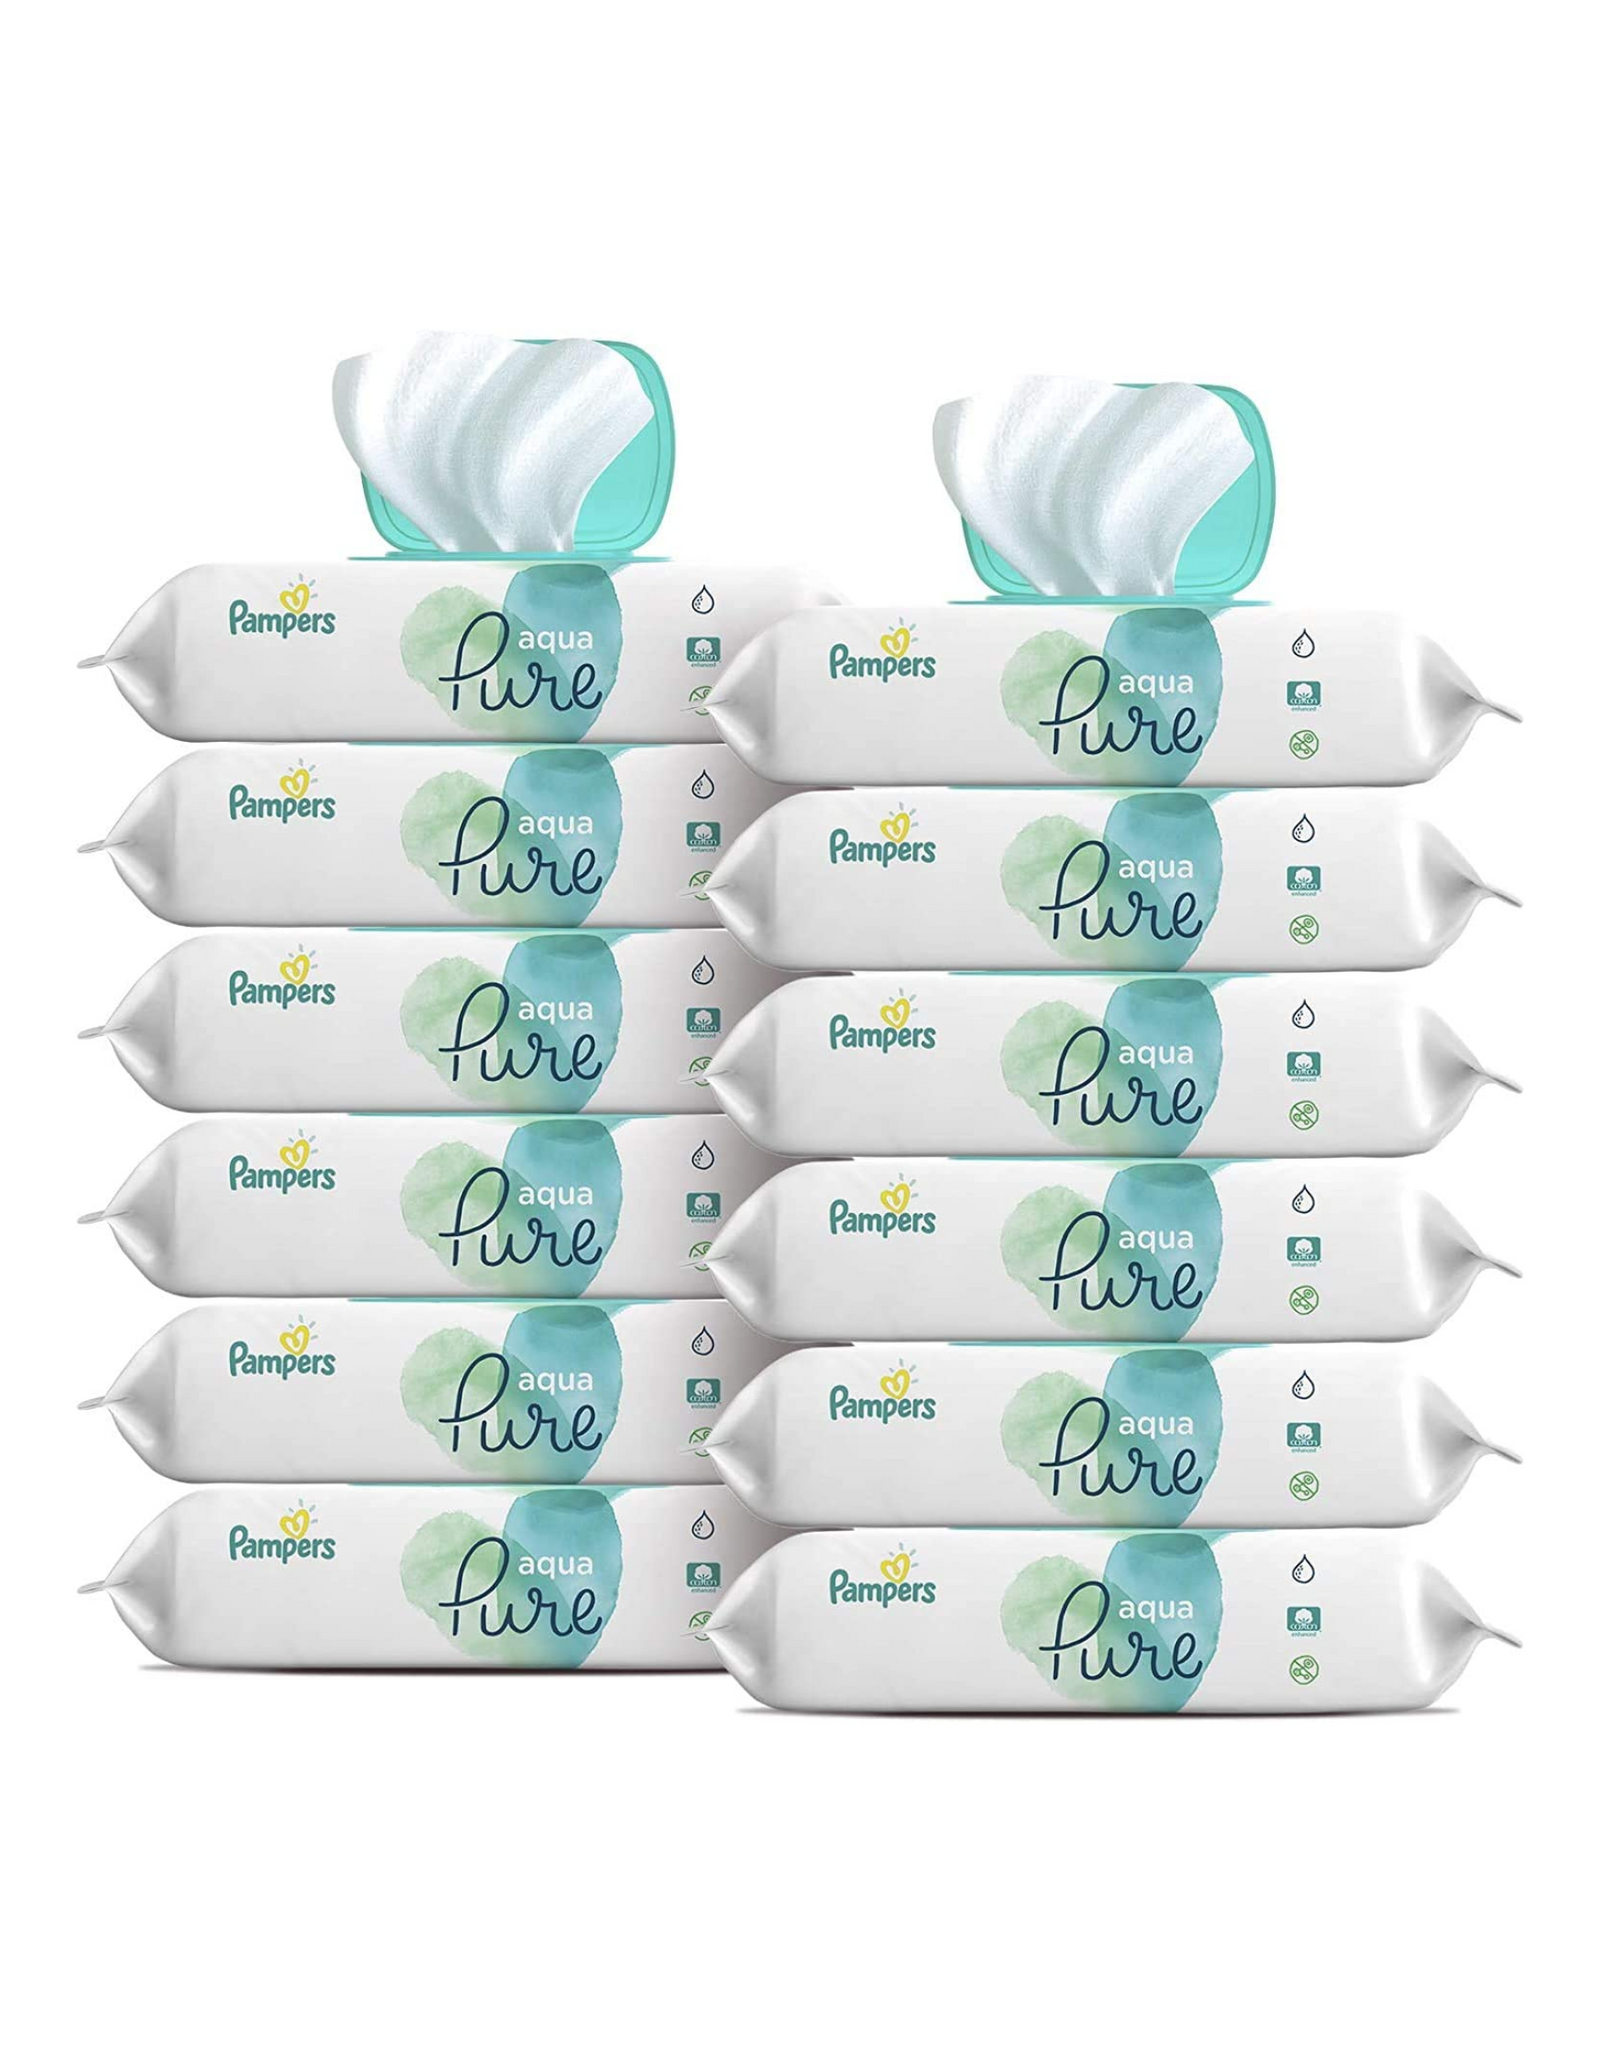 Pampers Aqua Pure Sensitive Water Baby Diaper Wipes, Hypoallergenic and Unscented, 672 Ct (12 Packs)